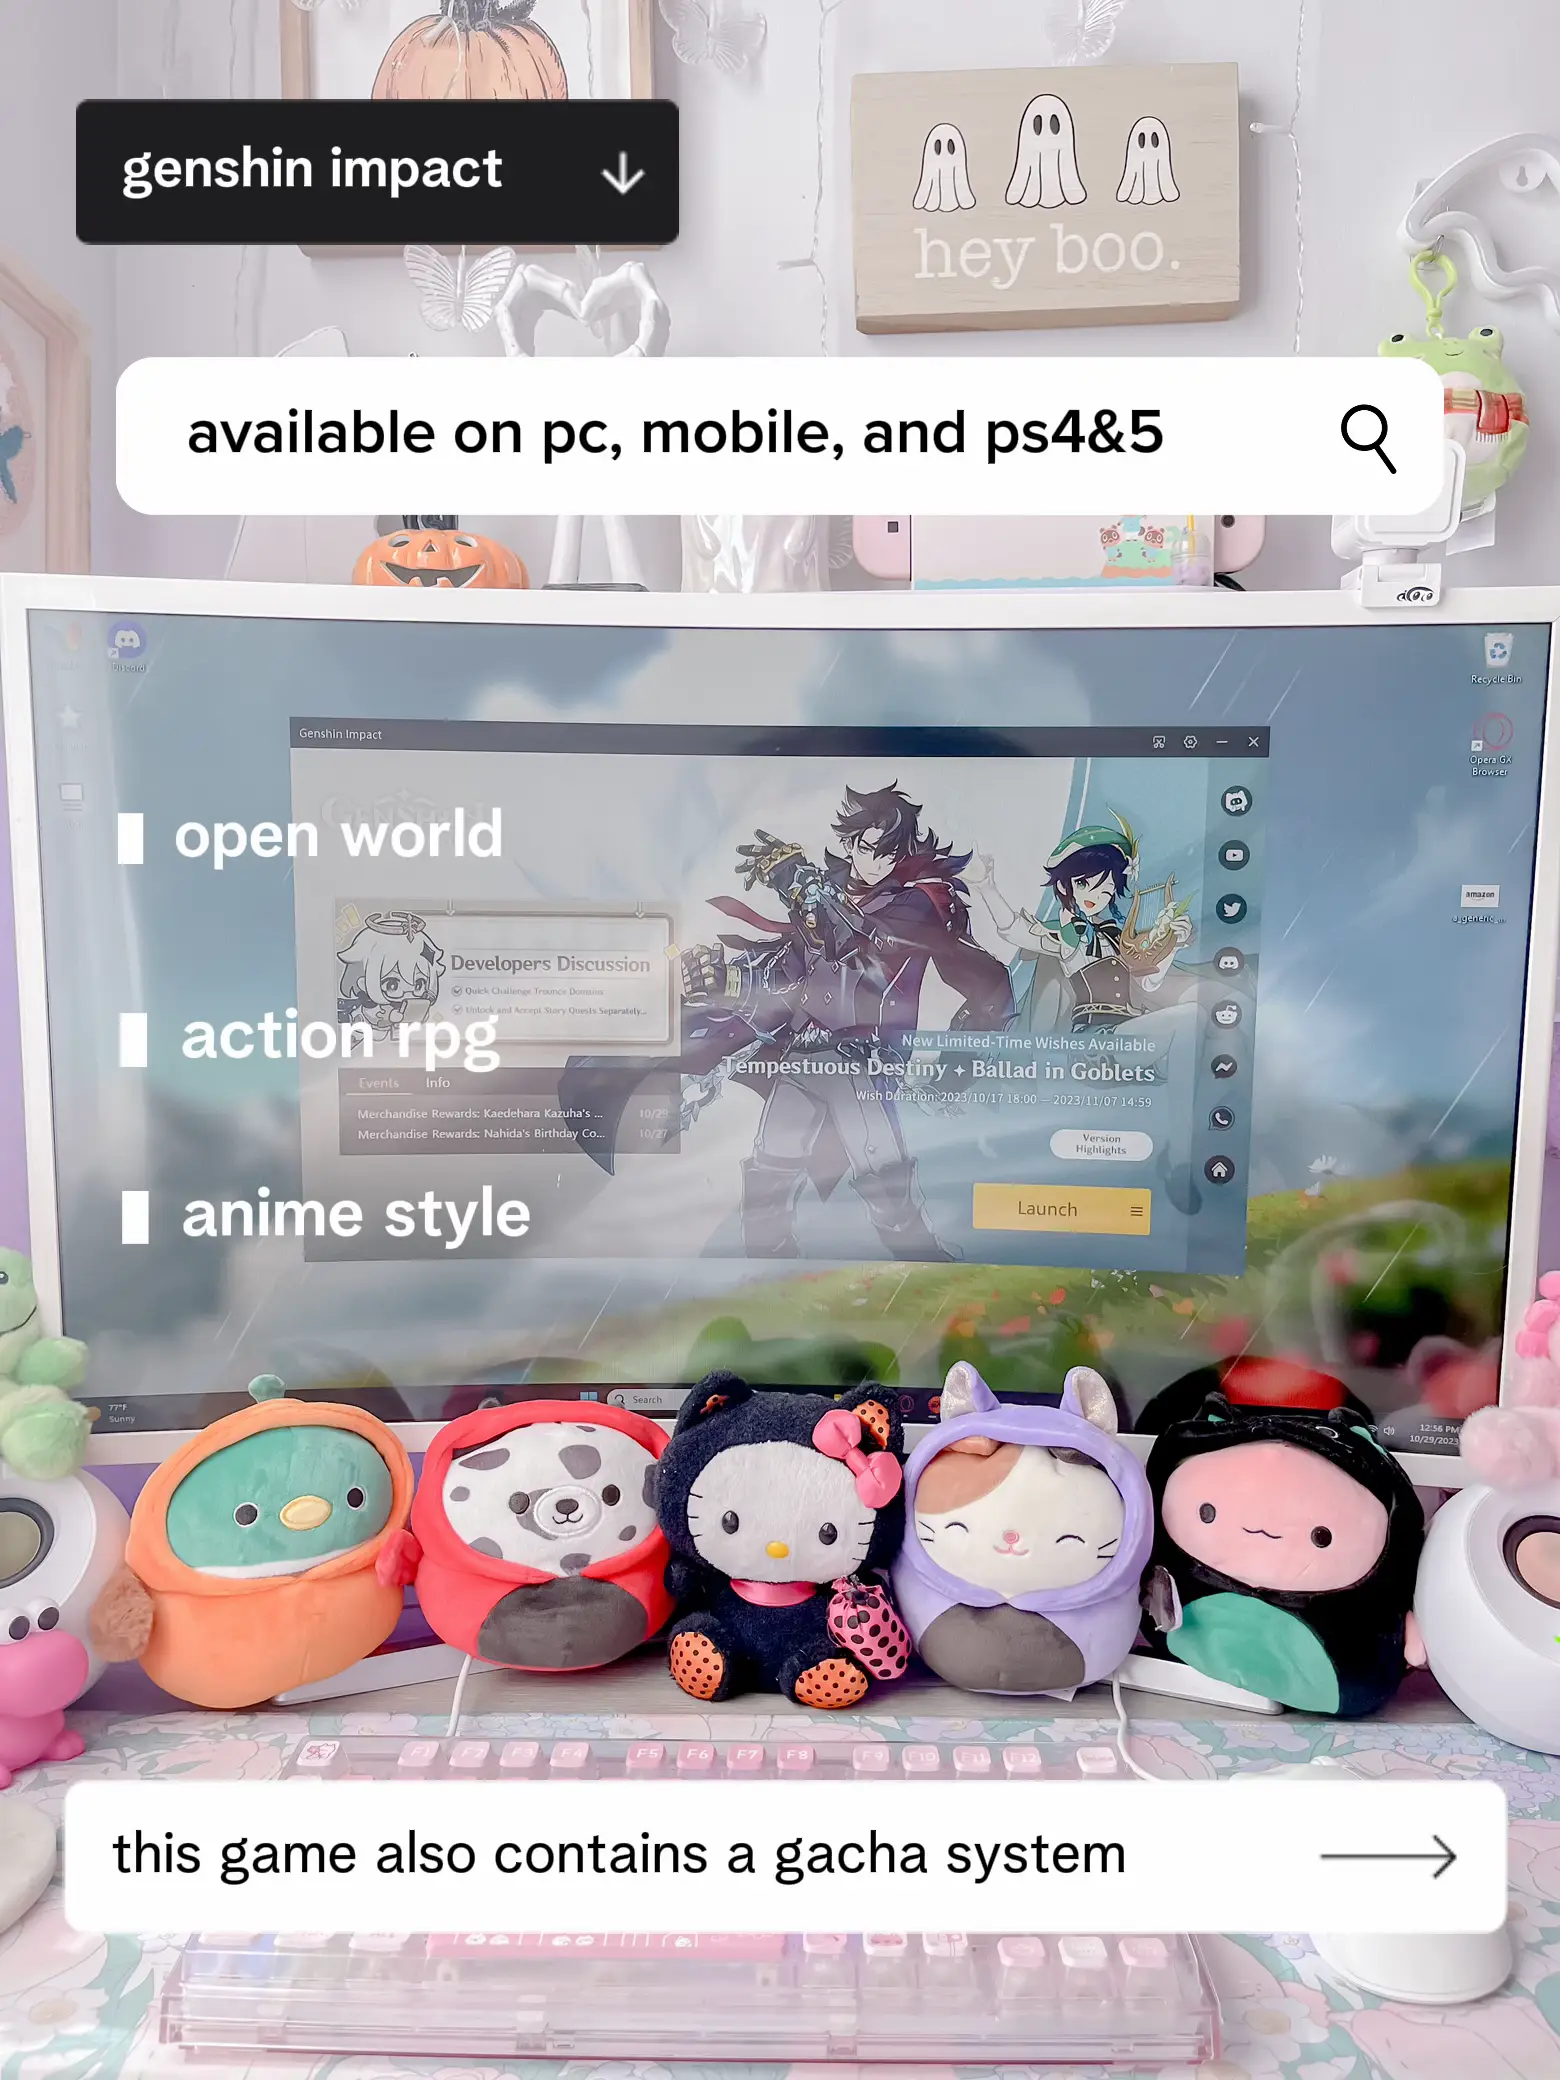  A screen showing a game with a gacha system